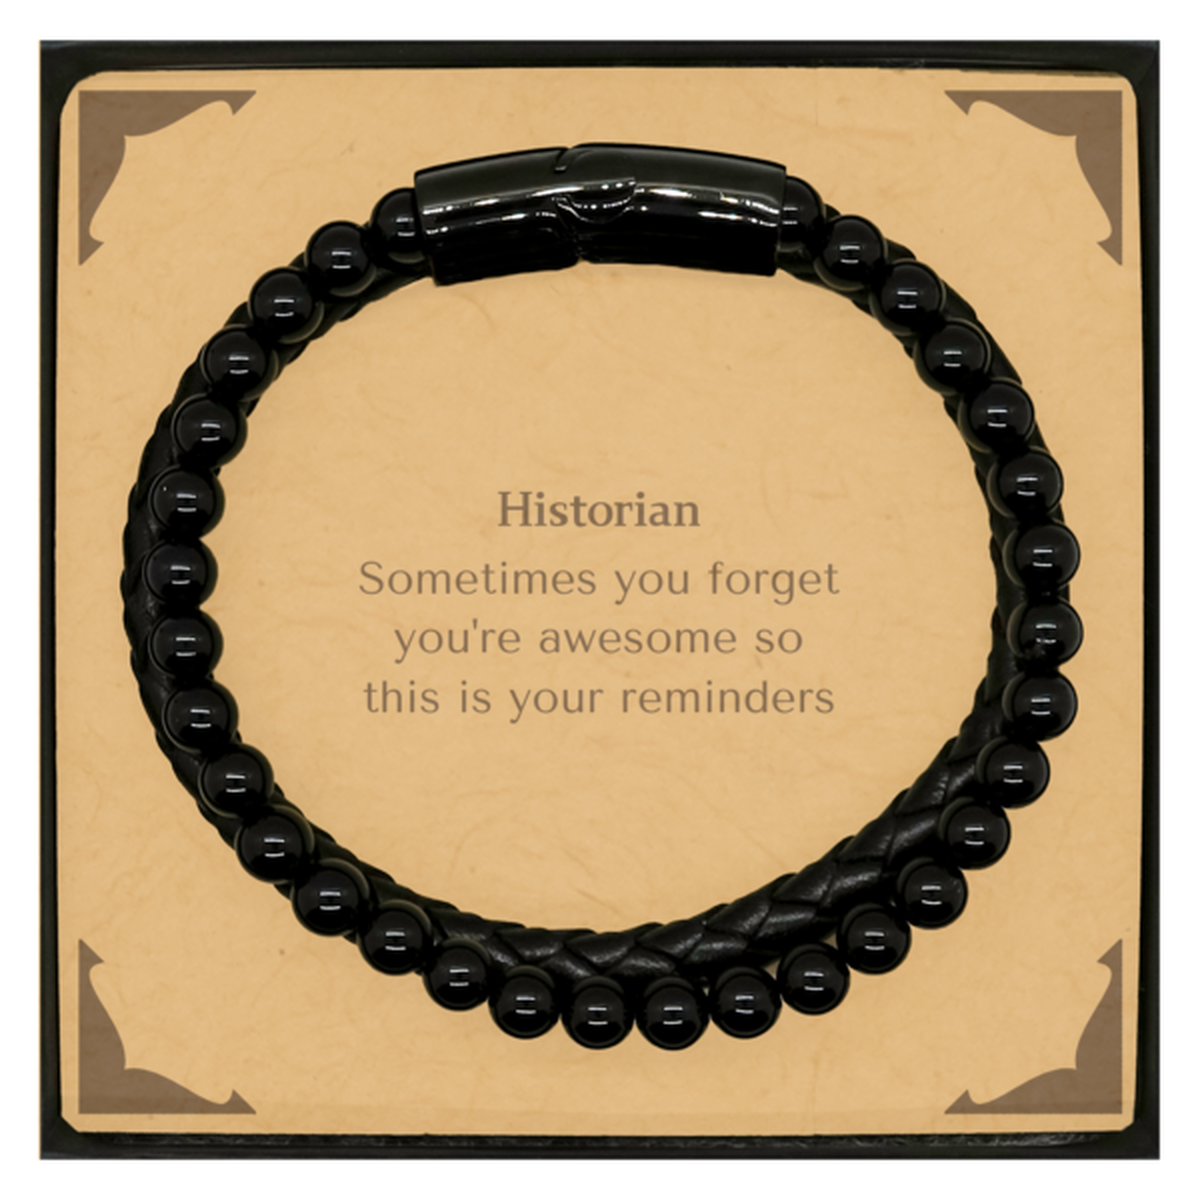 Sentimental Historian Stone Leather Bracelets, Historian Sometimes you forget you're awesome so this is your reminders, Graduation Christmas Birthday Gifts for Historian, Men, Women, Coworkers